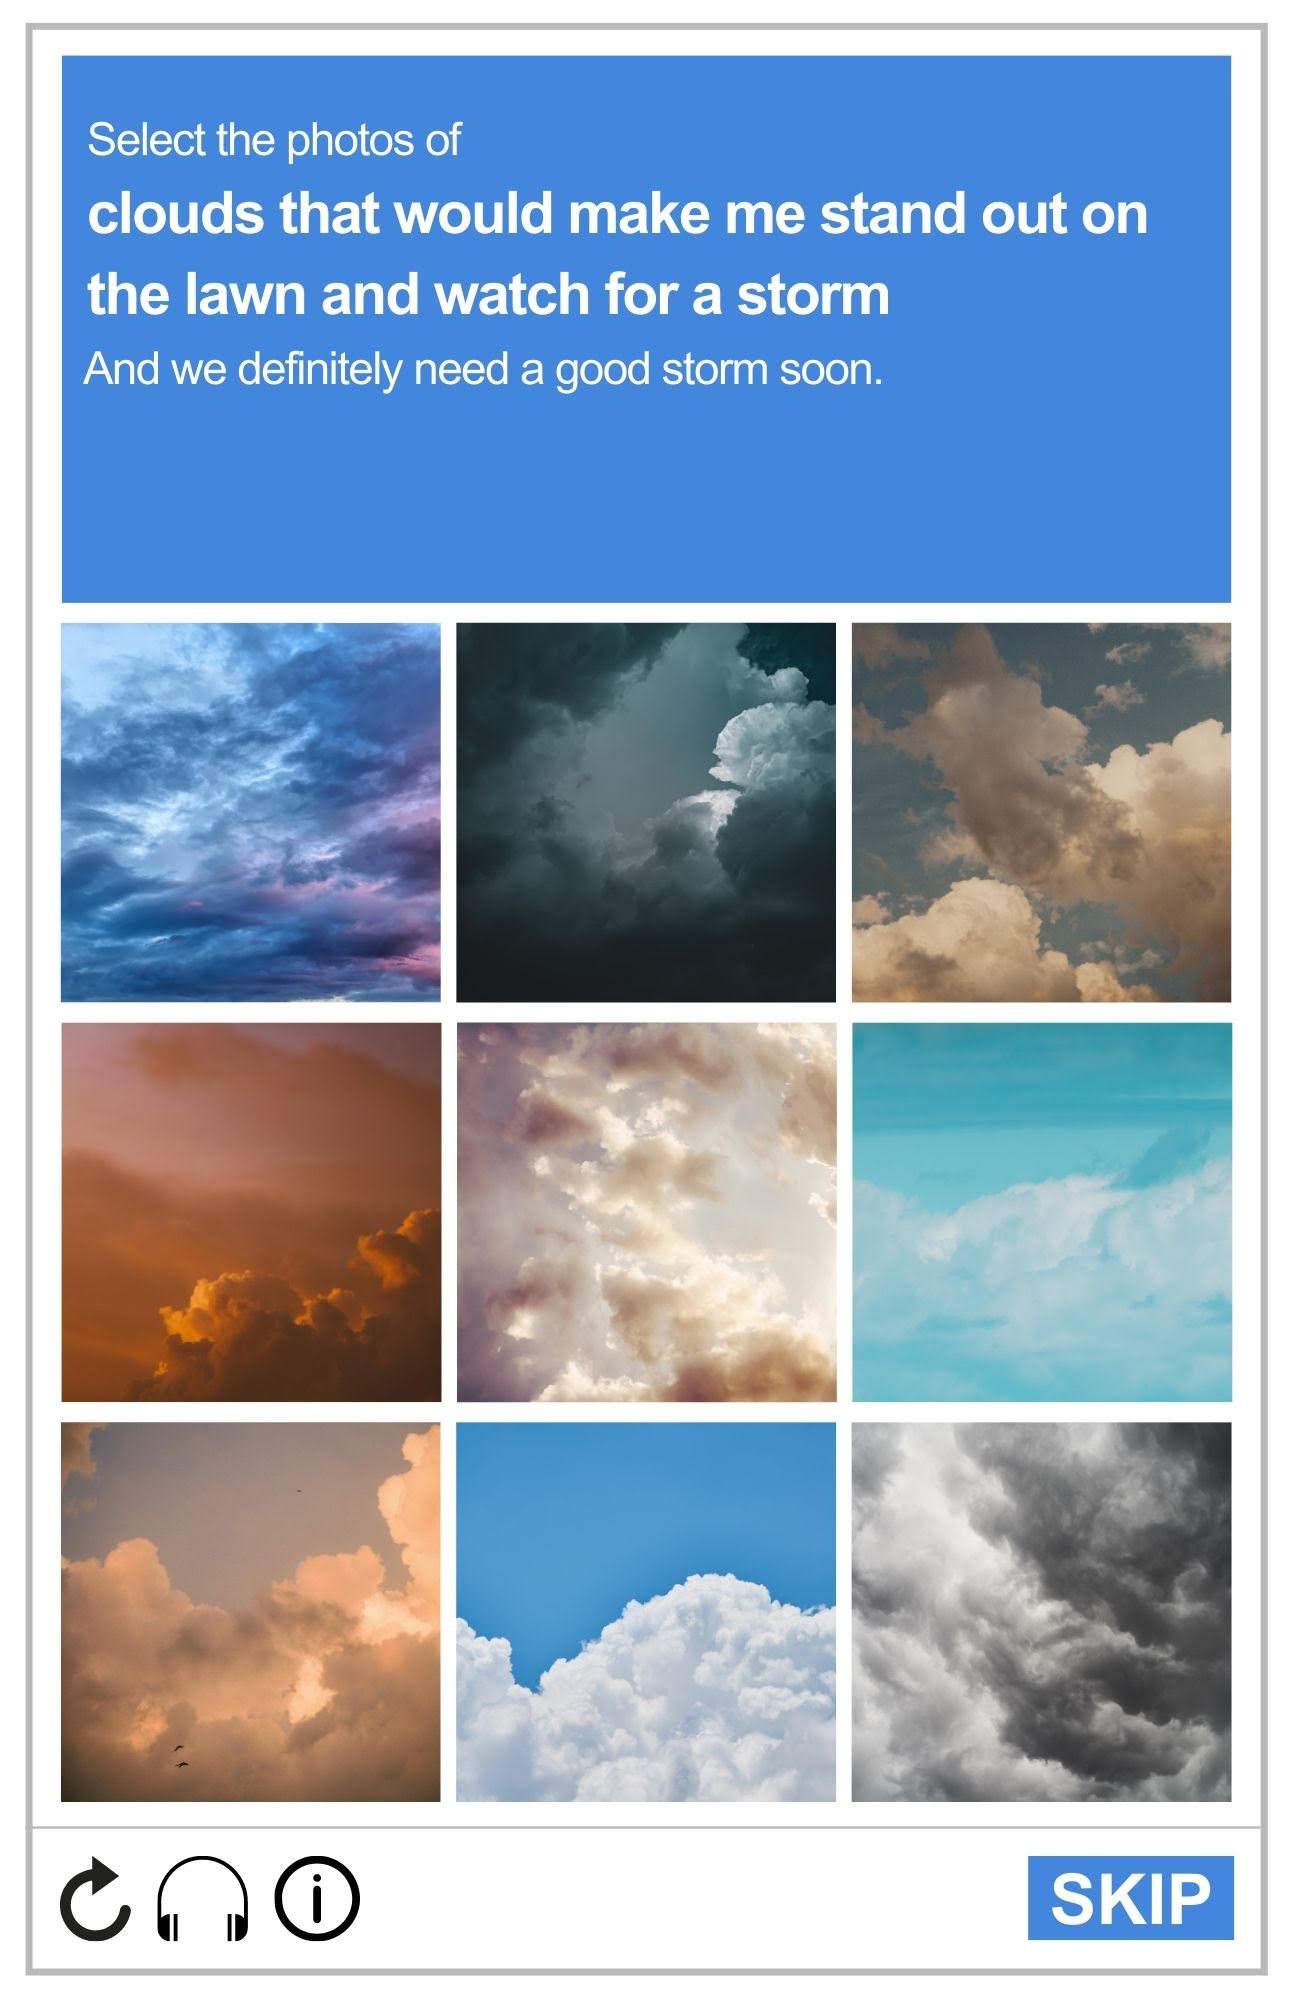 Image of a reCAPTCHA board, featuring various pictures of clouds. The prompt reads: Select the photos of clouds that would make me stand out on my lawn and watch for a storm. And we definitely need a good storm.